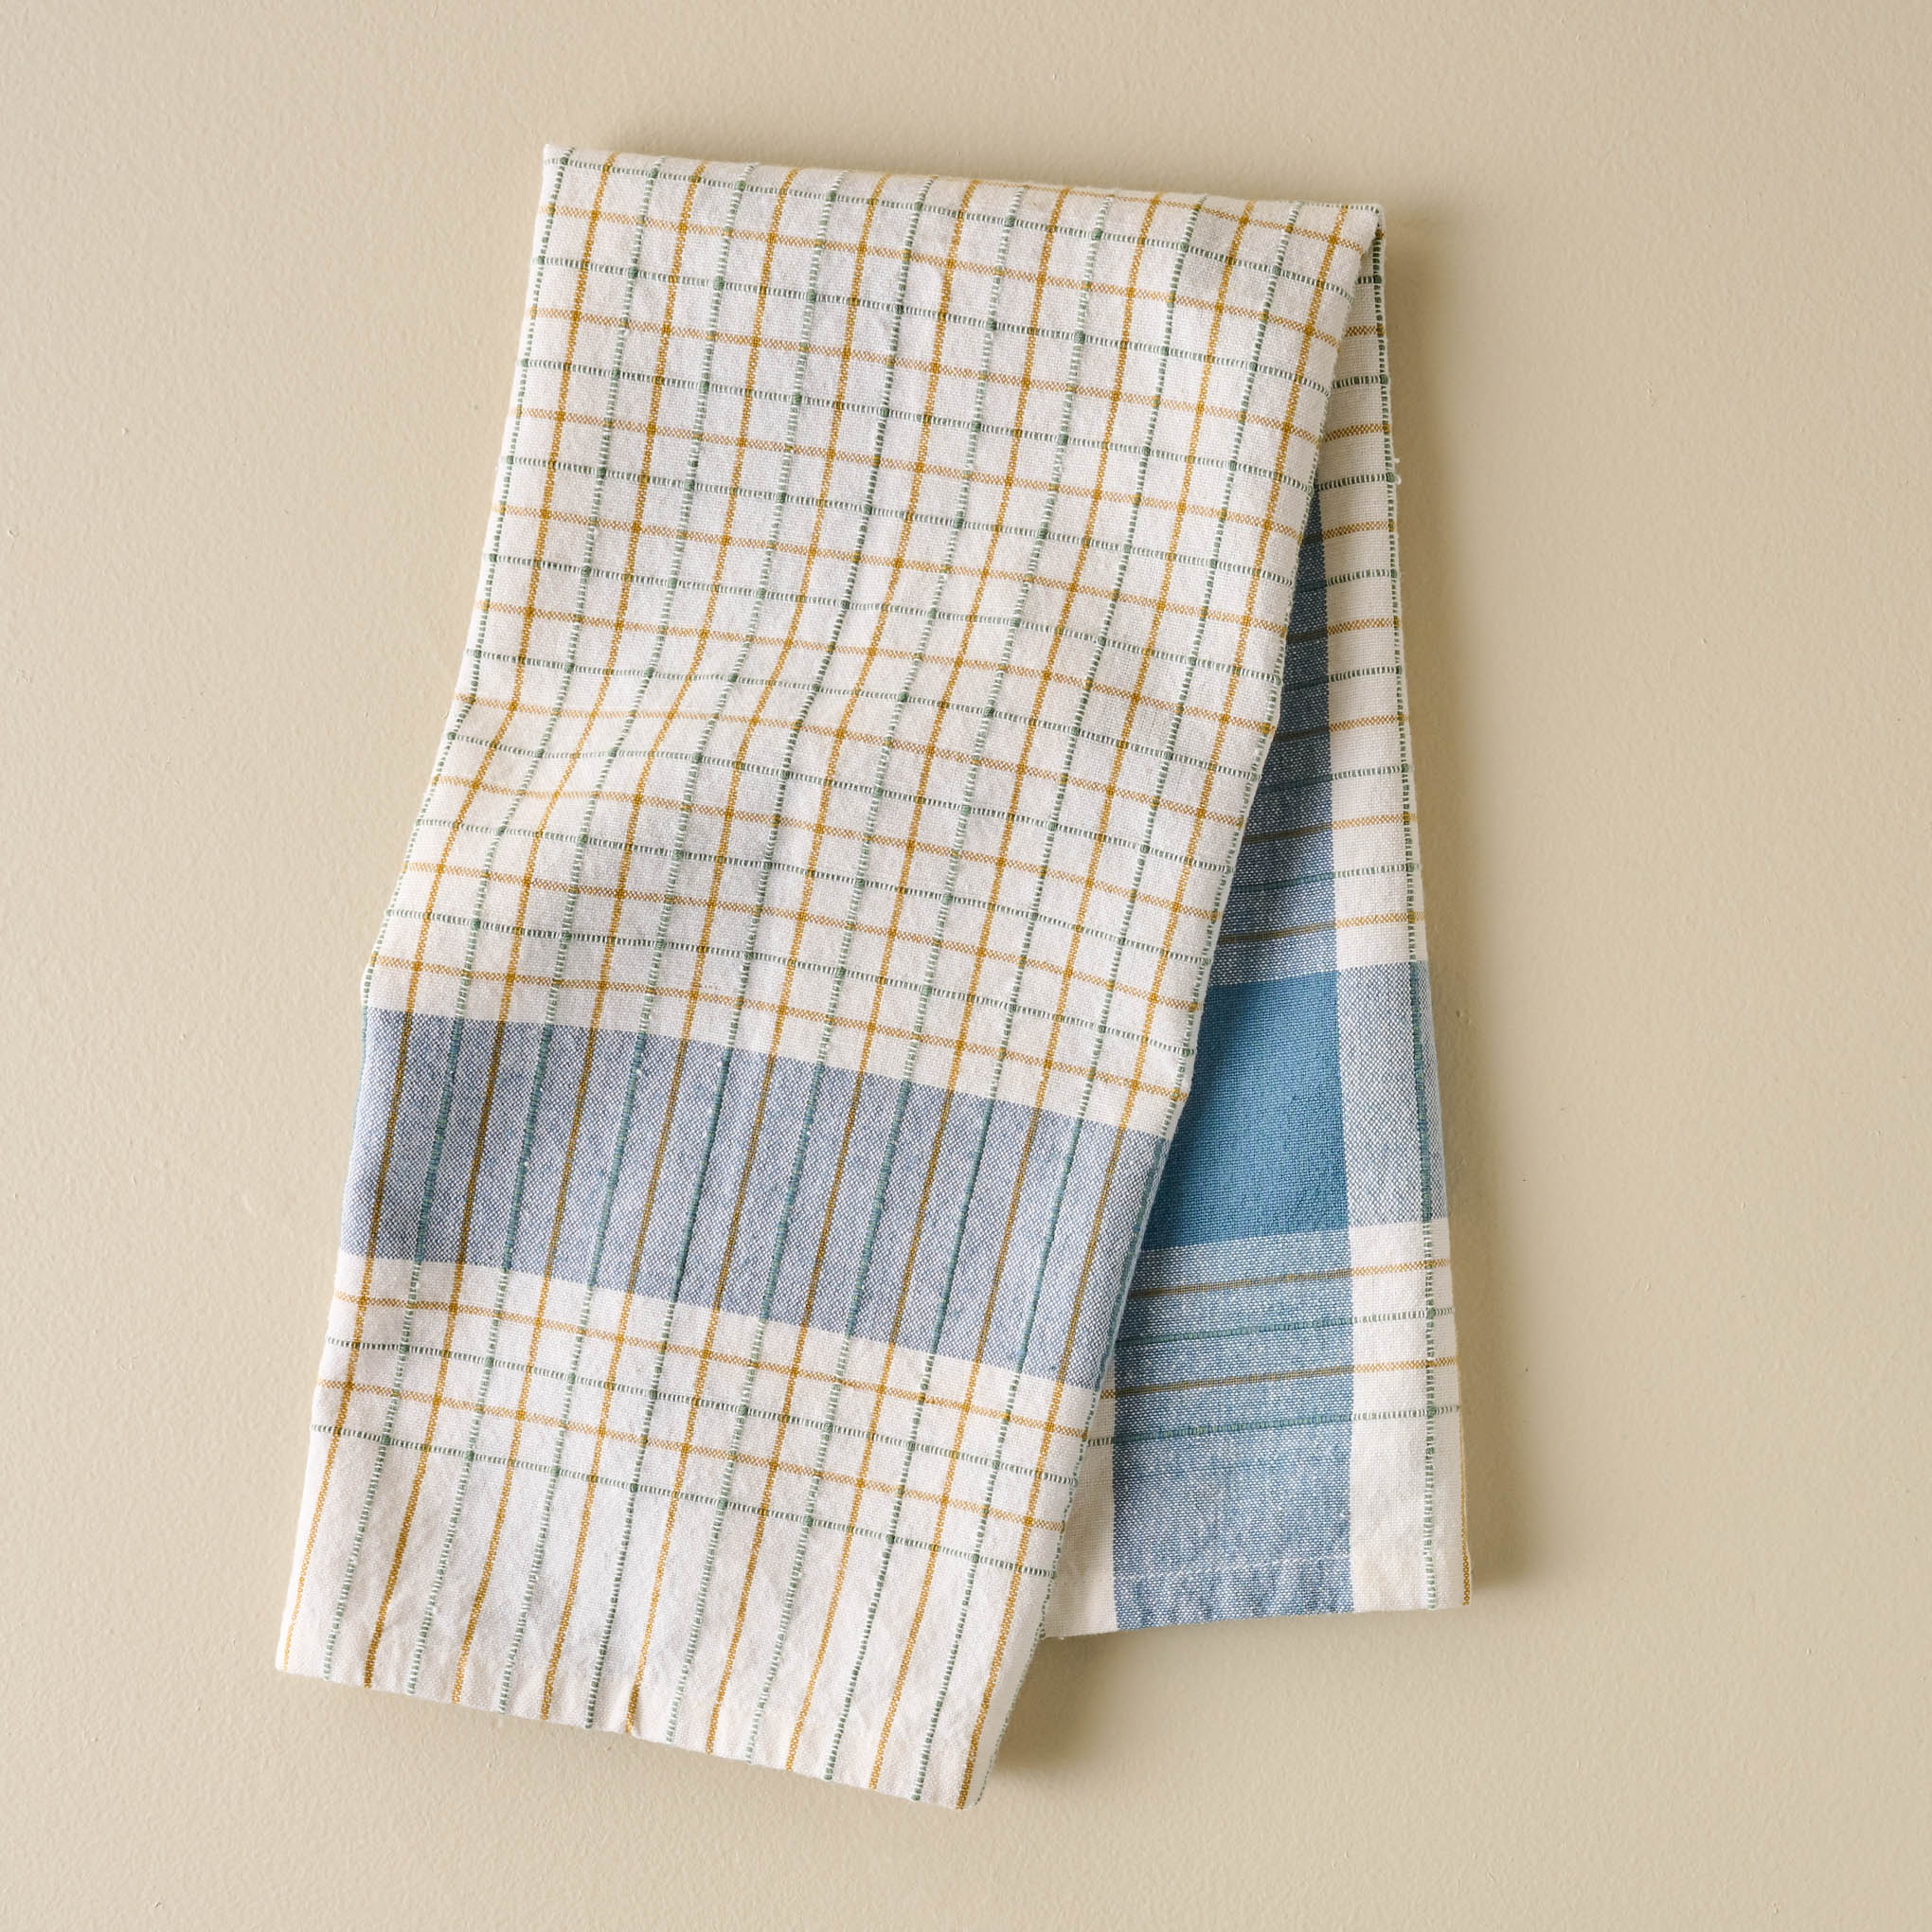 Vintage Plaid Tea Towel On sale for $12.80, discounted from $16.00